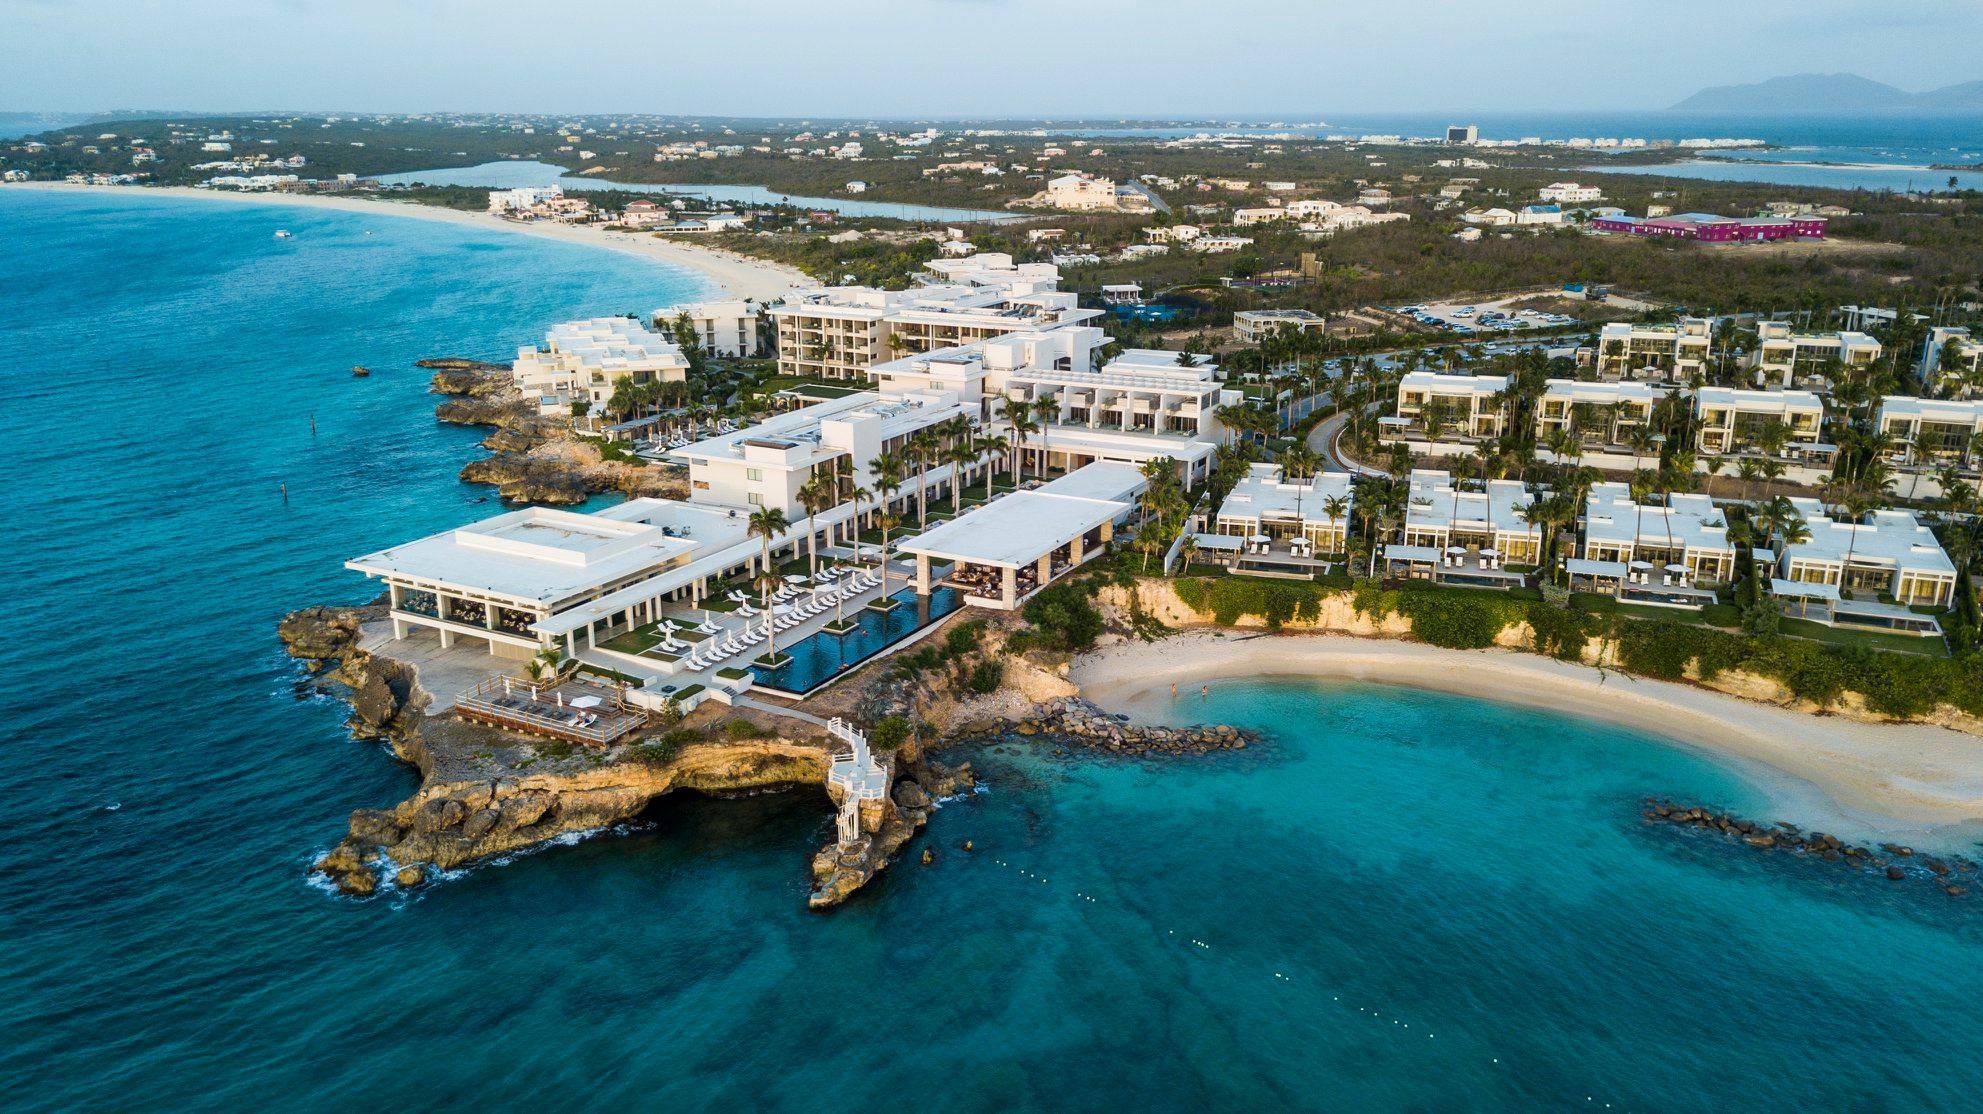 Four Seasons Anguilla - Overview